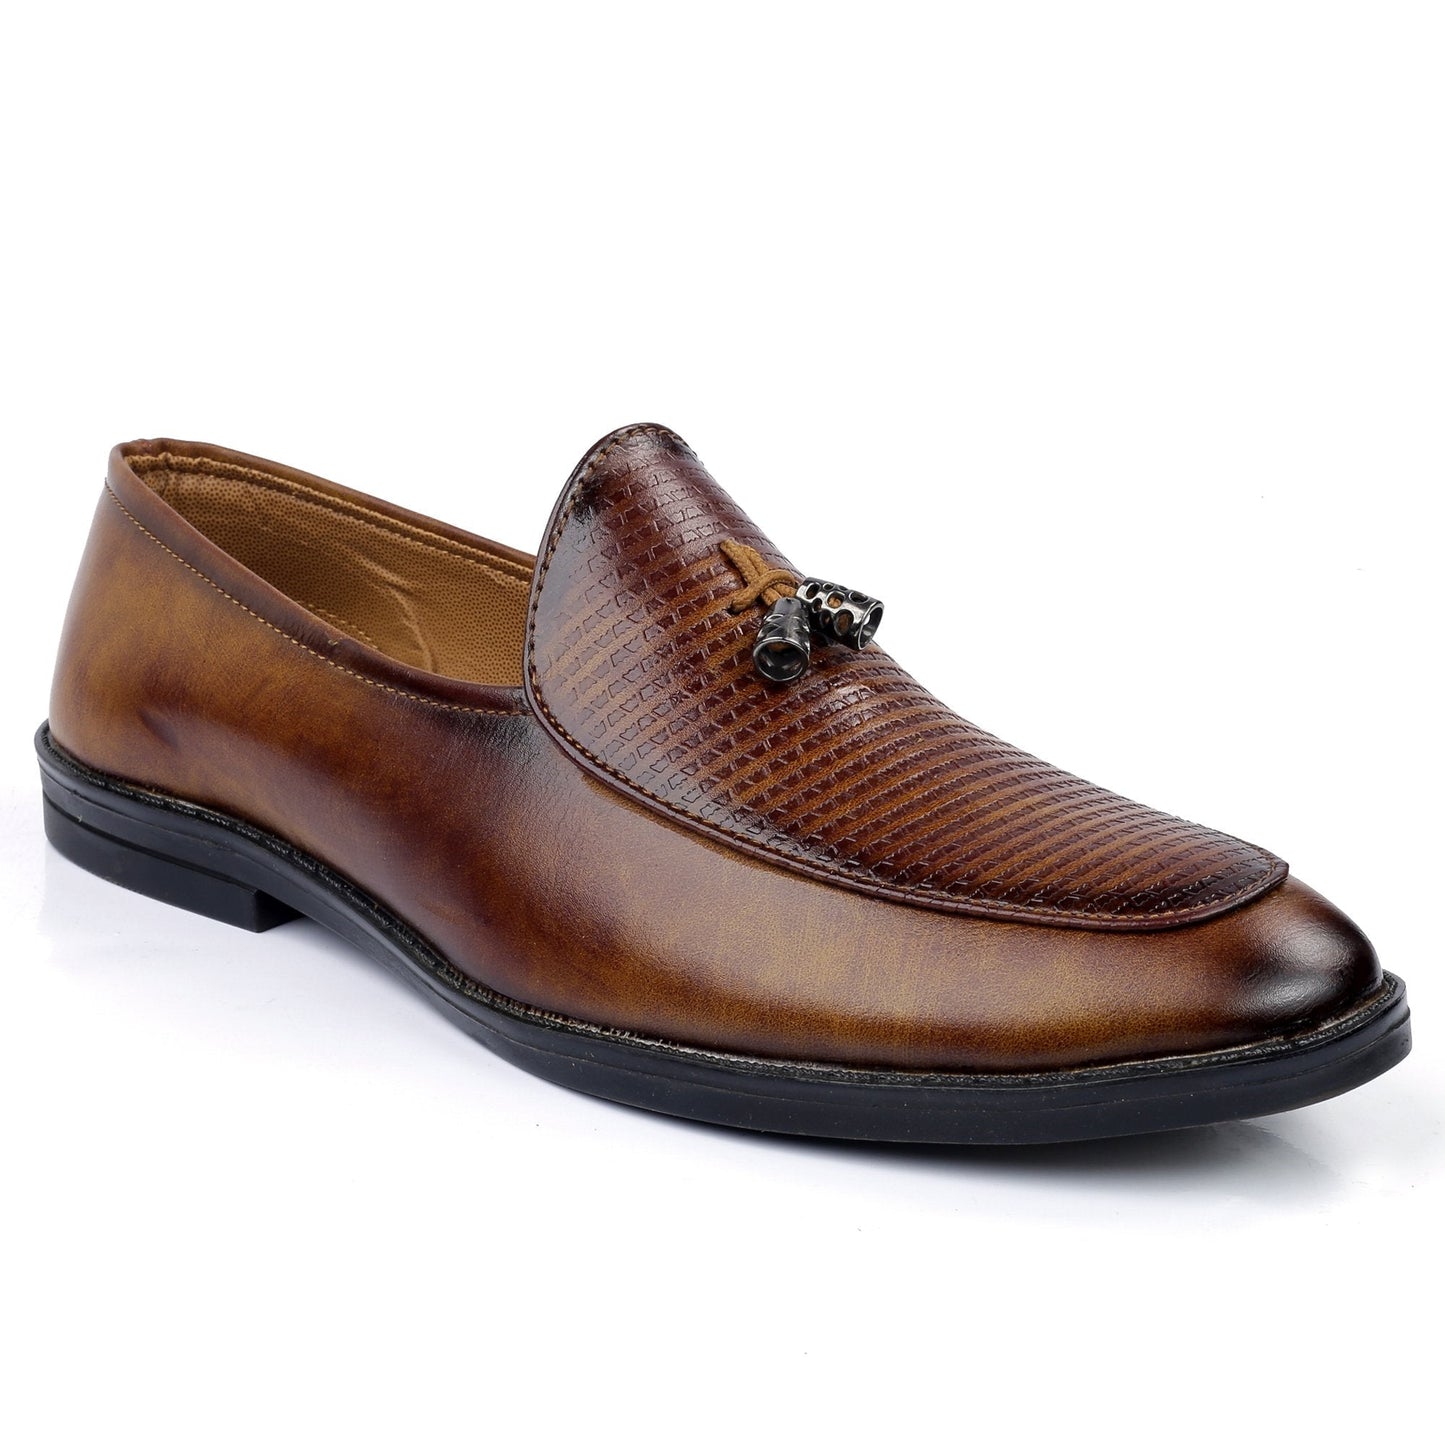 Stylish Moccasin Loafer Slip on For Men Party And Casual Wear -JackMarc - JACKMARC.COM